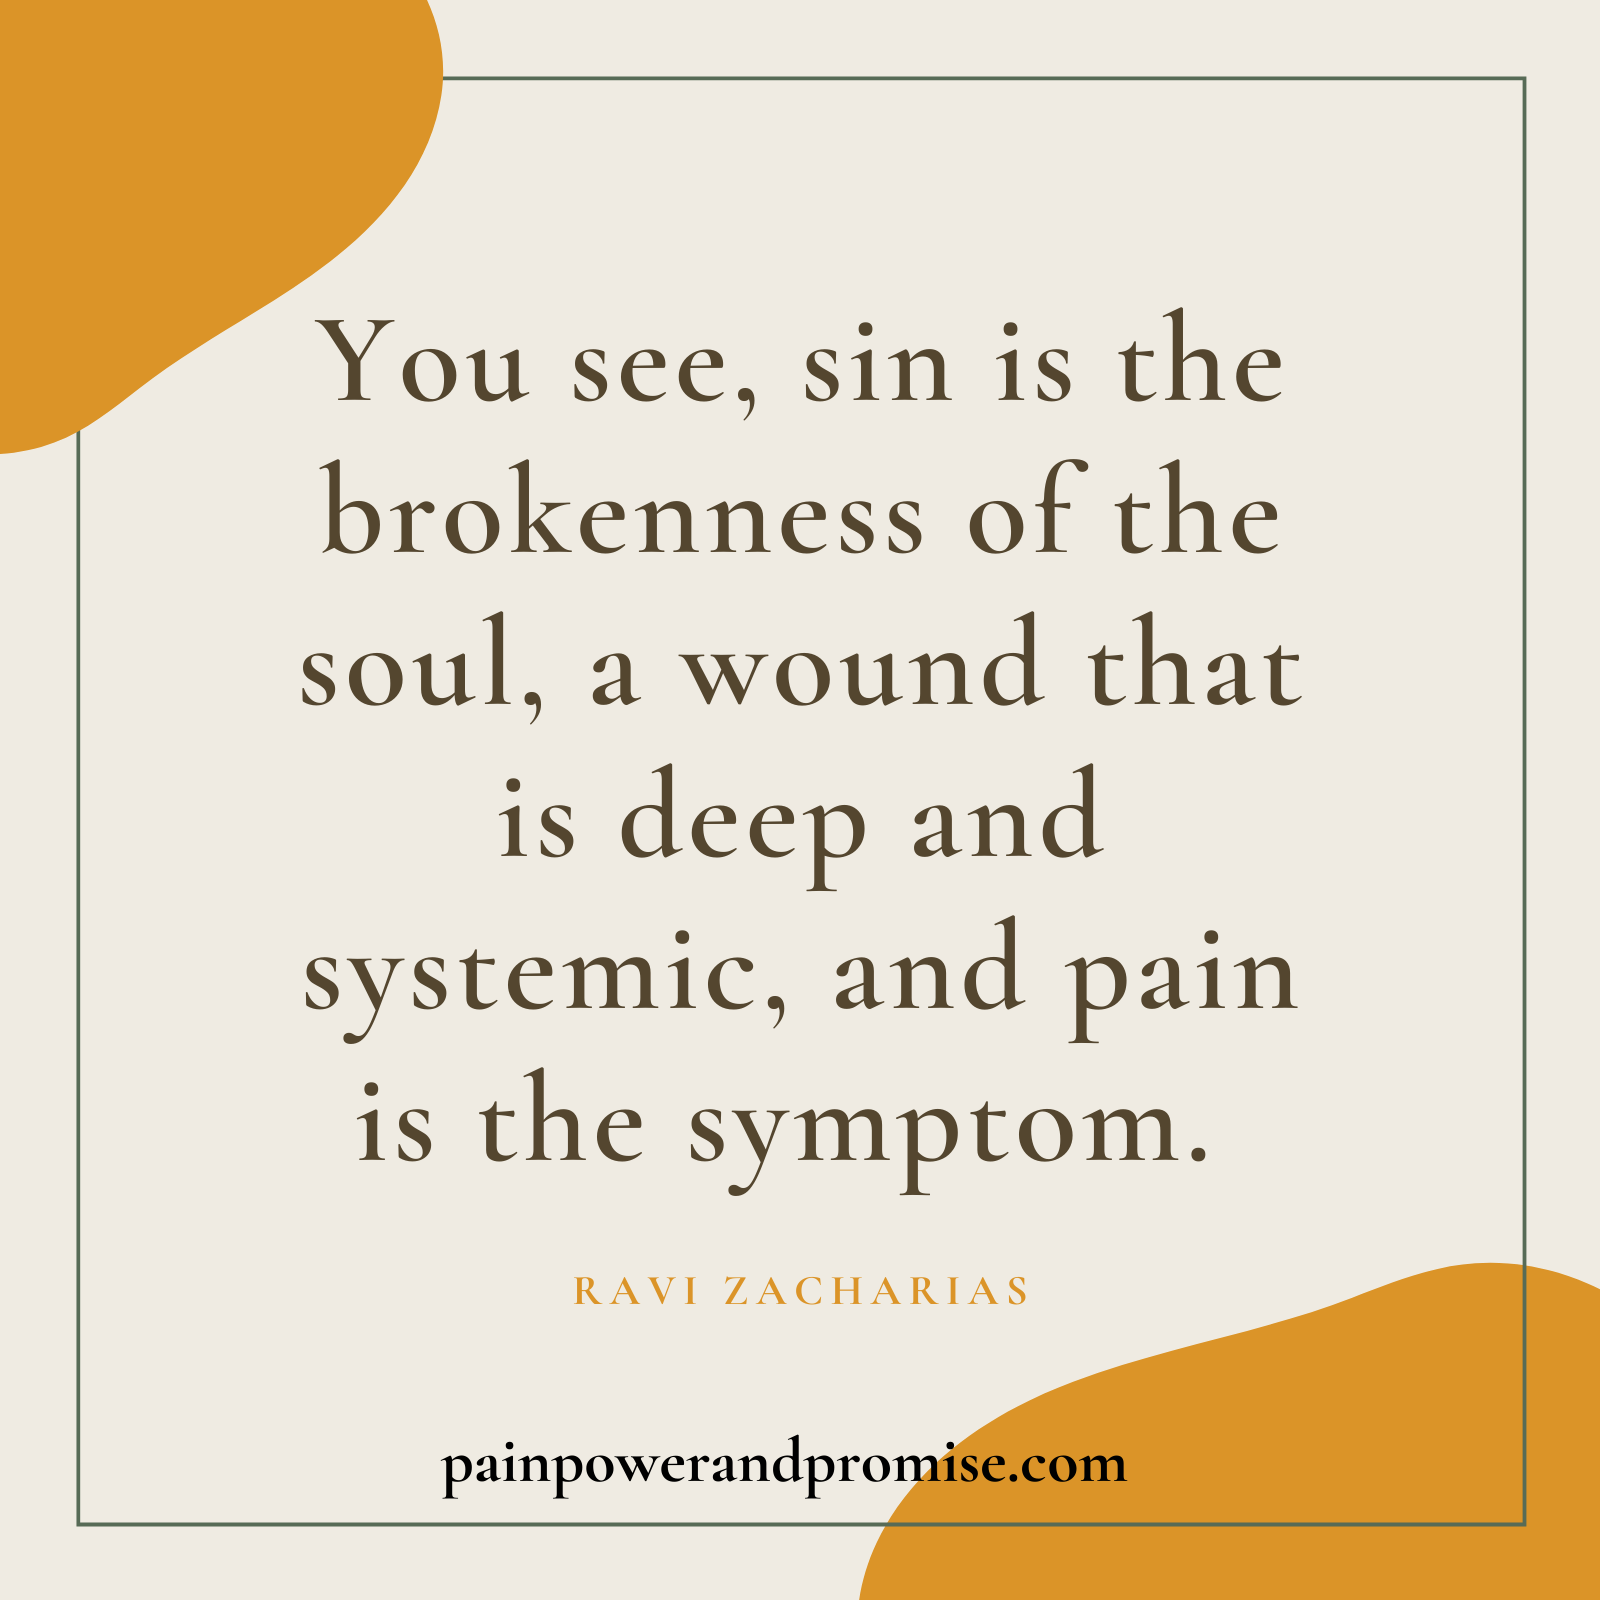 Quote: You see, sin is the brokenness of the soul, a wound that is deep and systemic, and pain is the symptom.